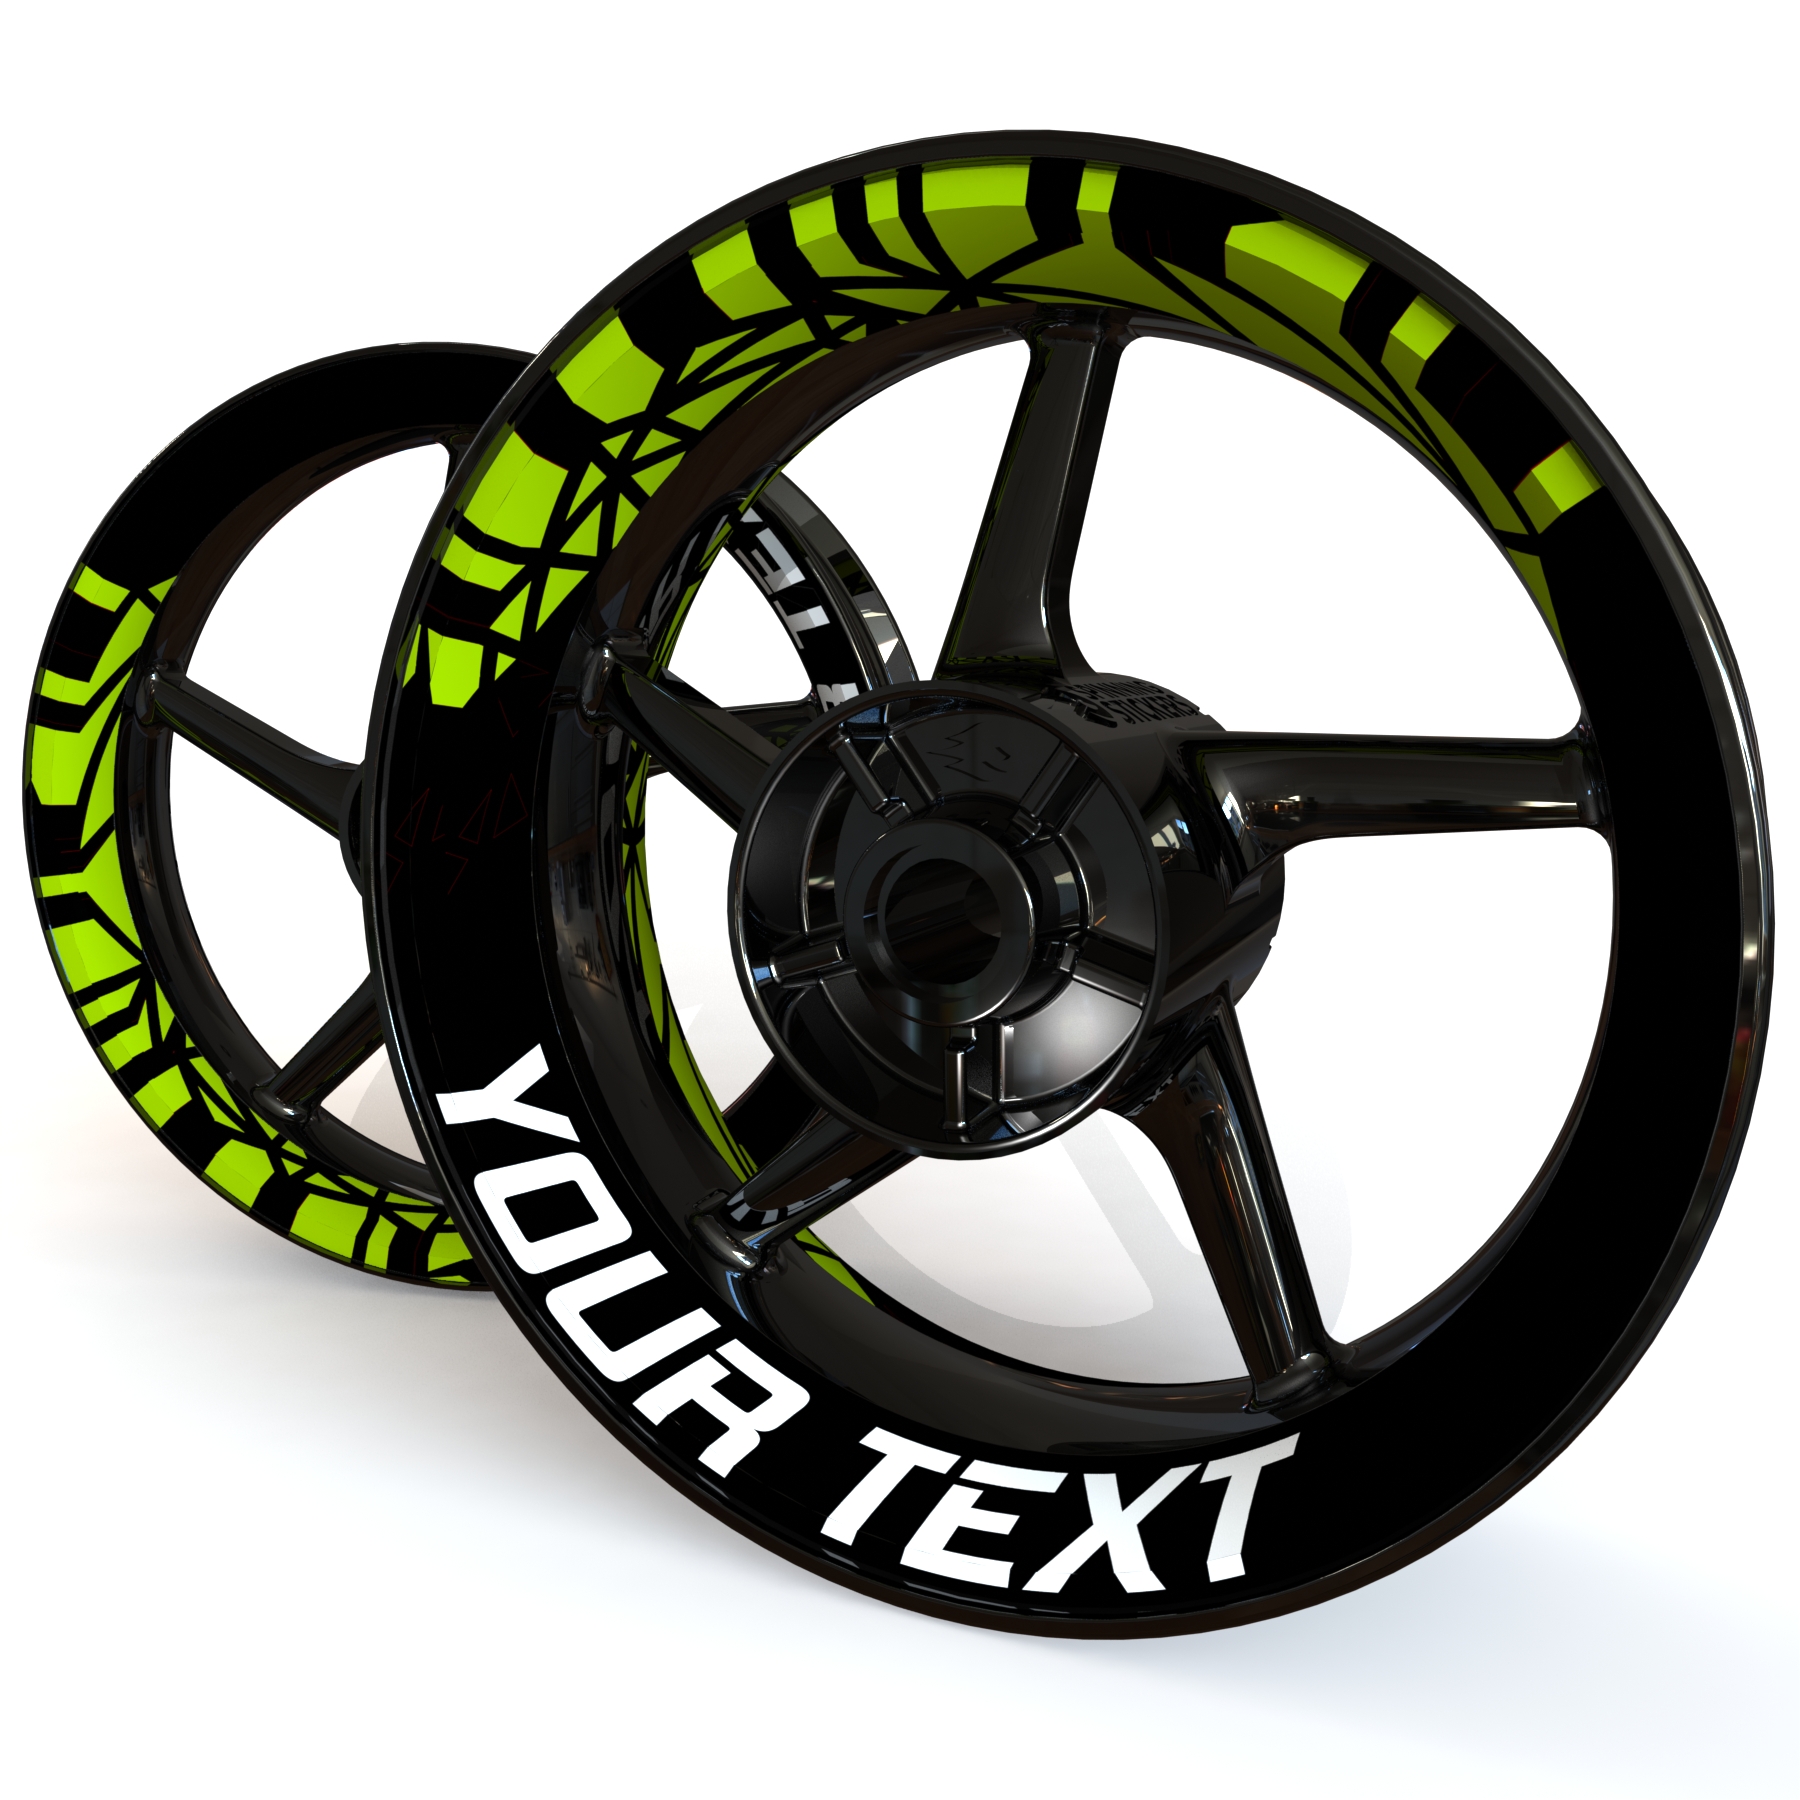 Black rim with your text rim stickers in black and lime green